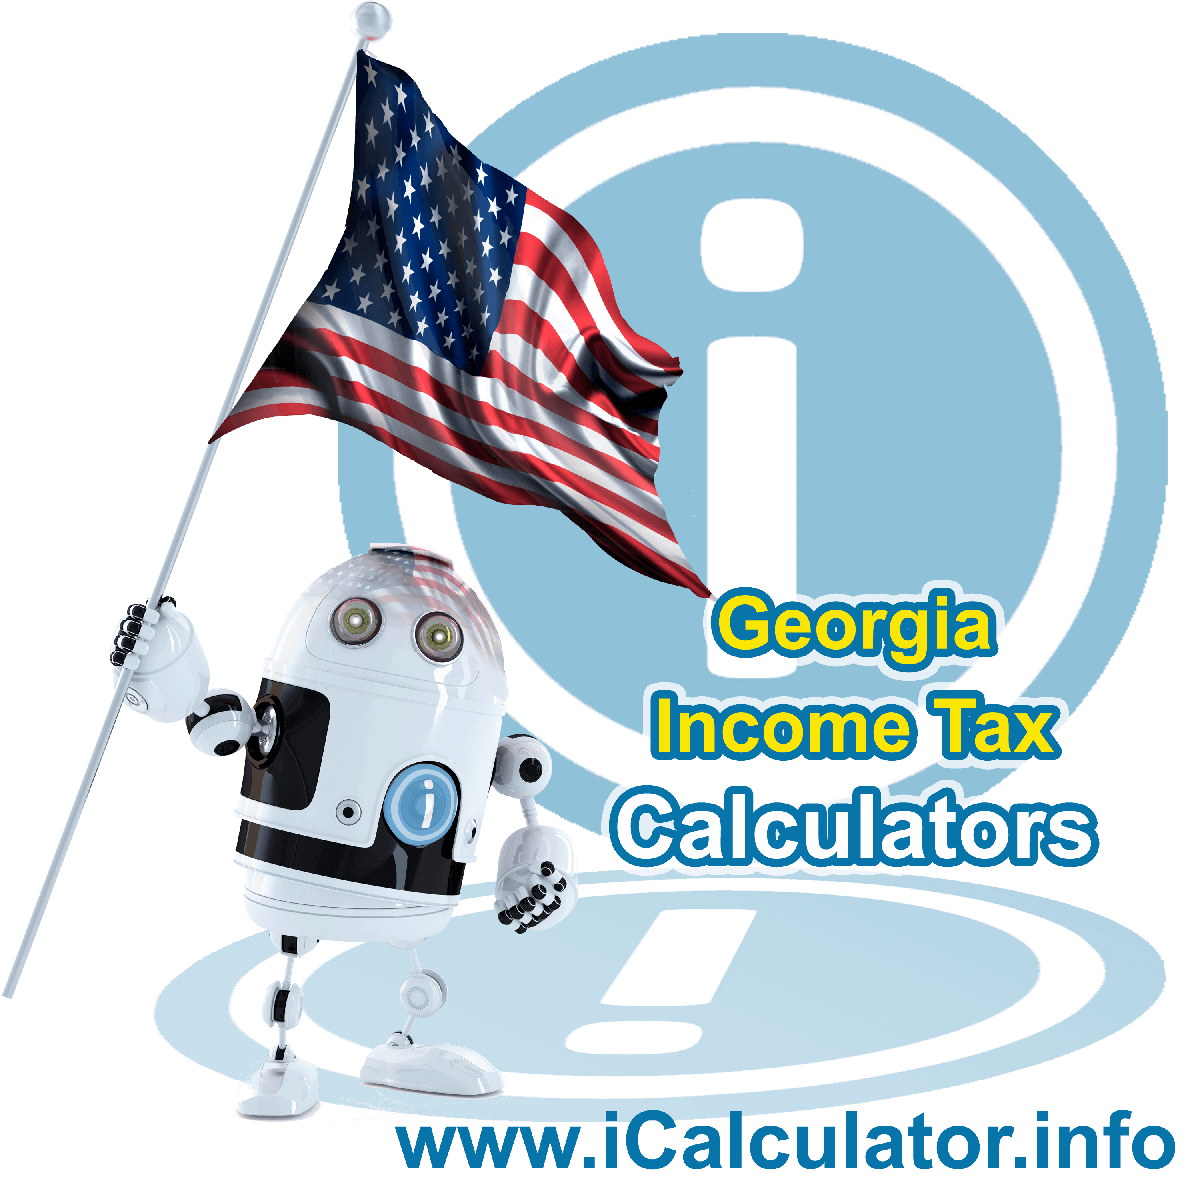 Georgia Income Tax Calculator. This image shows a new employer in Georgia calculating the annual payroll costs based on multiple payroll payments in one year in Georgia using the Georgia income tax calculator to understand their payroll costs in Georgia in 2023